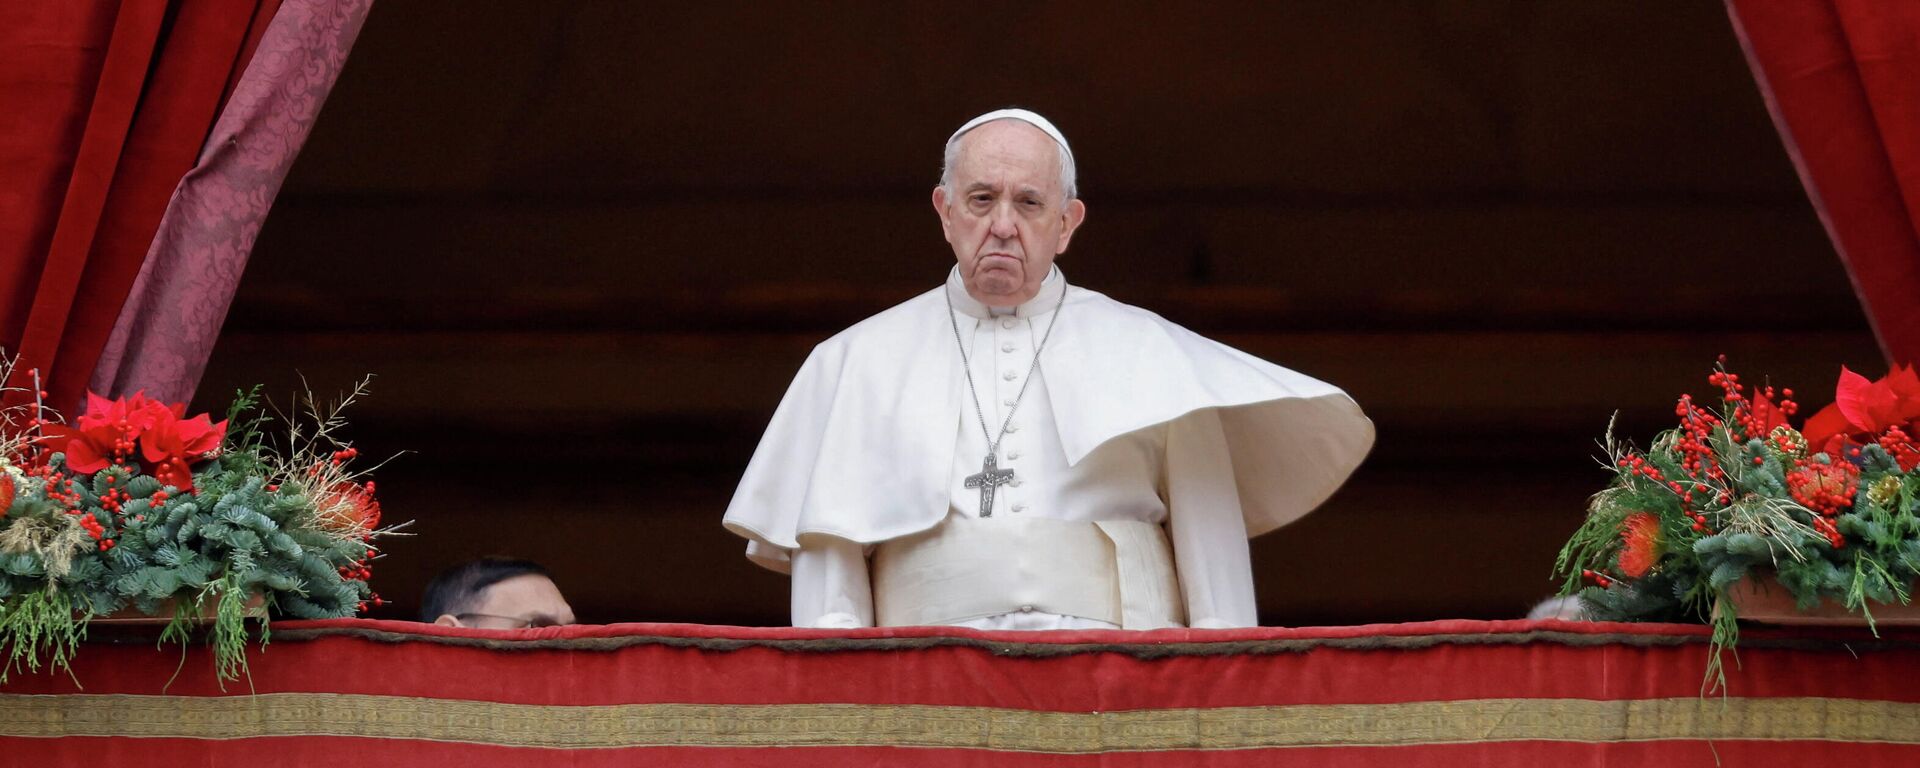 Pope Francis arrives to deliver his traditional Christmas Day Urbi et Orbi speech to the city and the world from the main balcony of St. Peter's Basilica at the Vatican, December 25, 2021 - Sputnik International, 1920, 26.12.2021